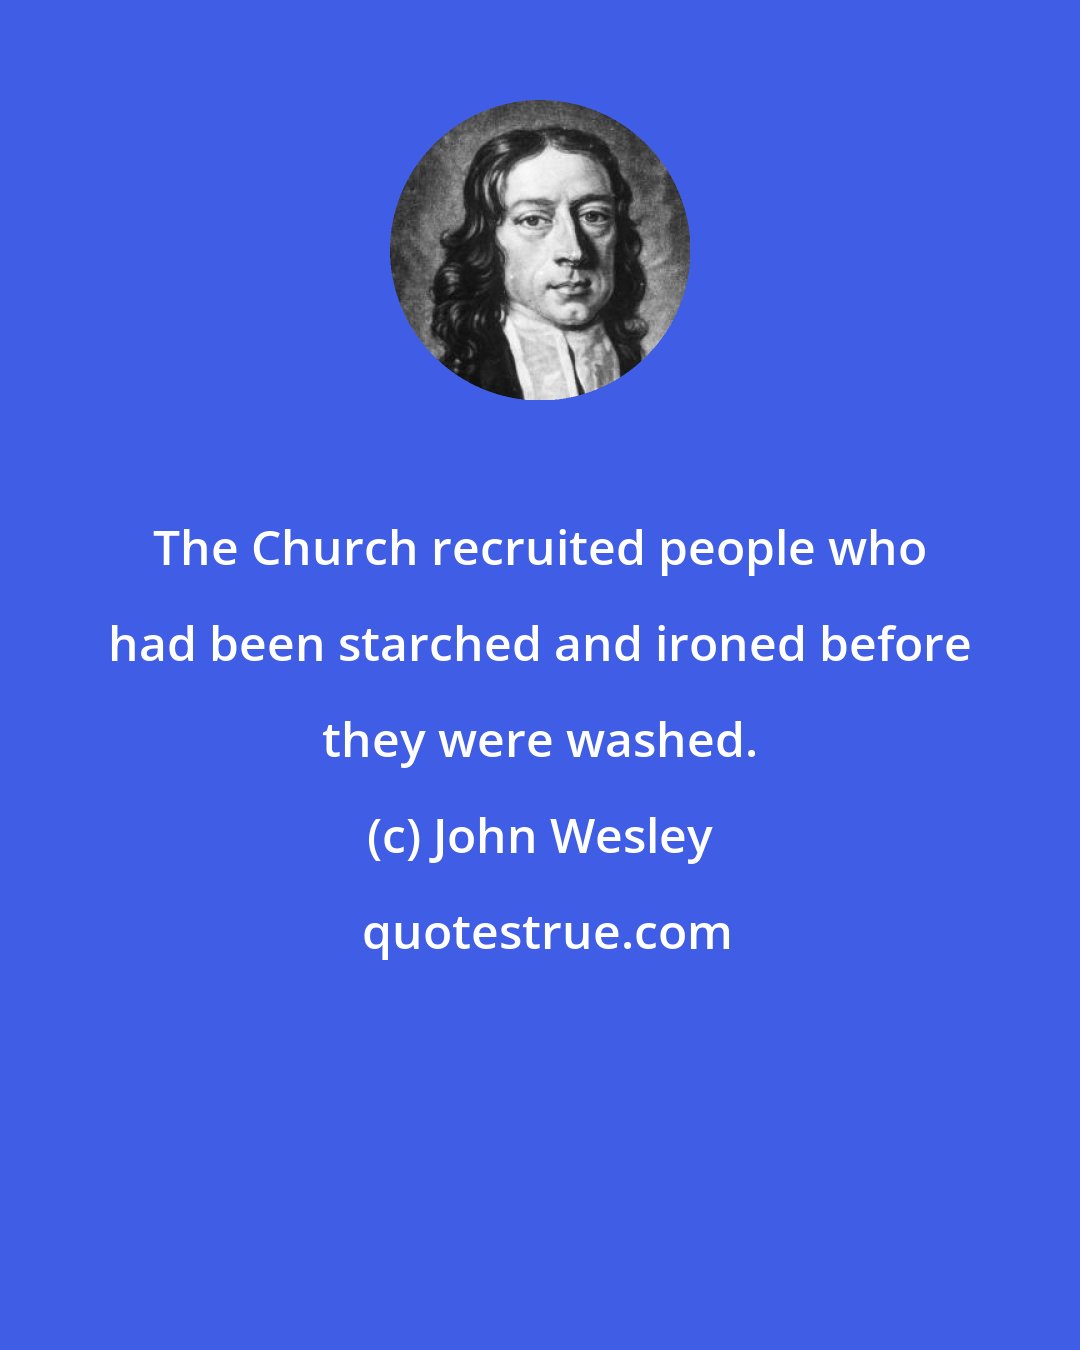 John Wesley: The Church recruited people who had been starched and ironed before they were washed.